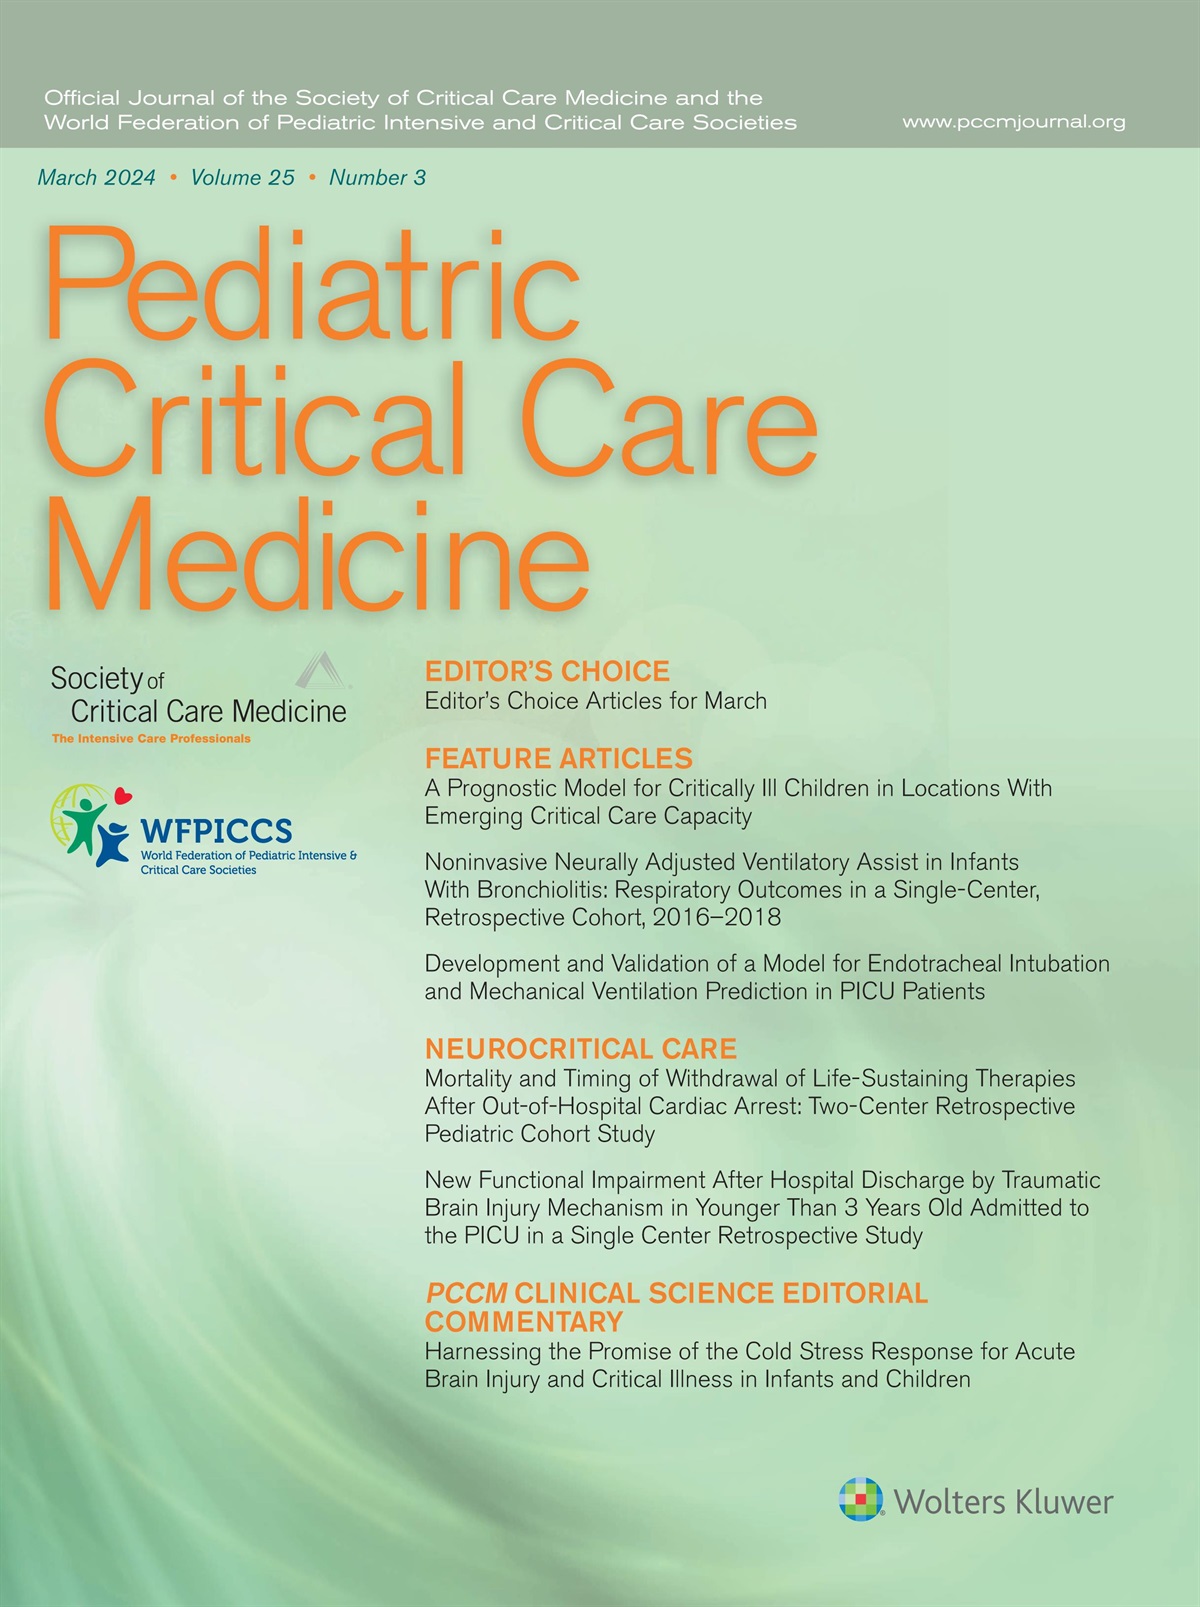 Executive Summary of the Second International Guidelines for the Diagnosis and Management of Pediatric Acute Respiratory Distress Syndrome (PALICC-2): Erratum